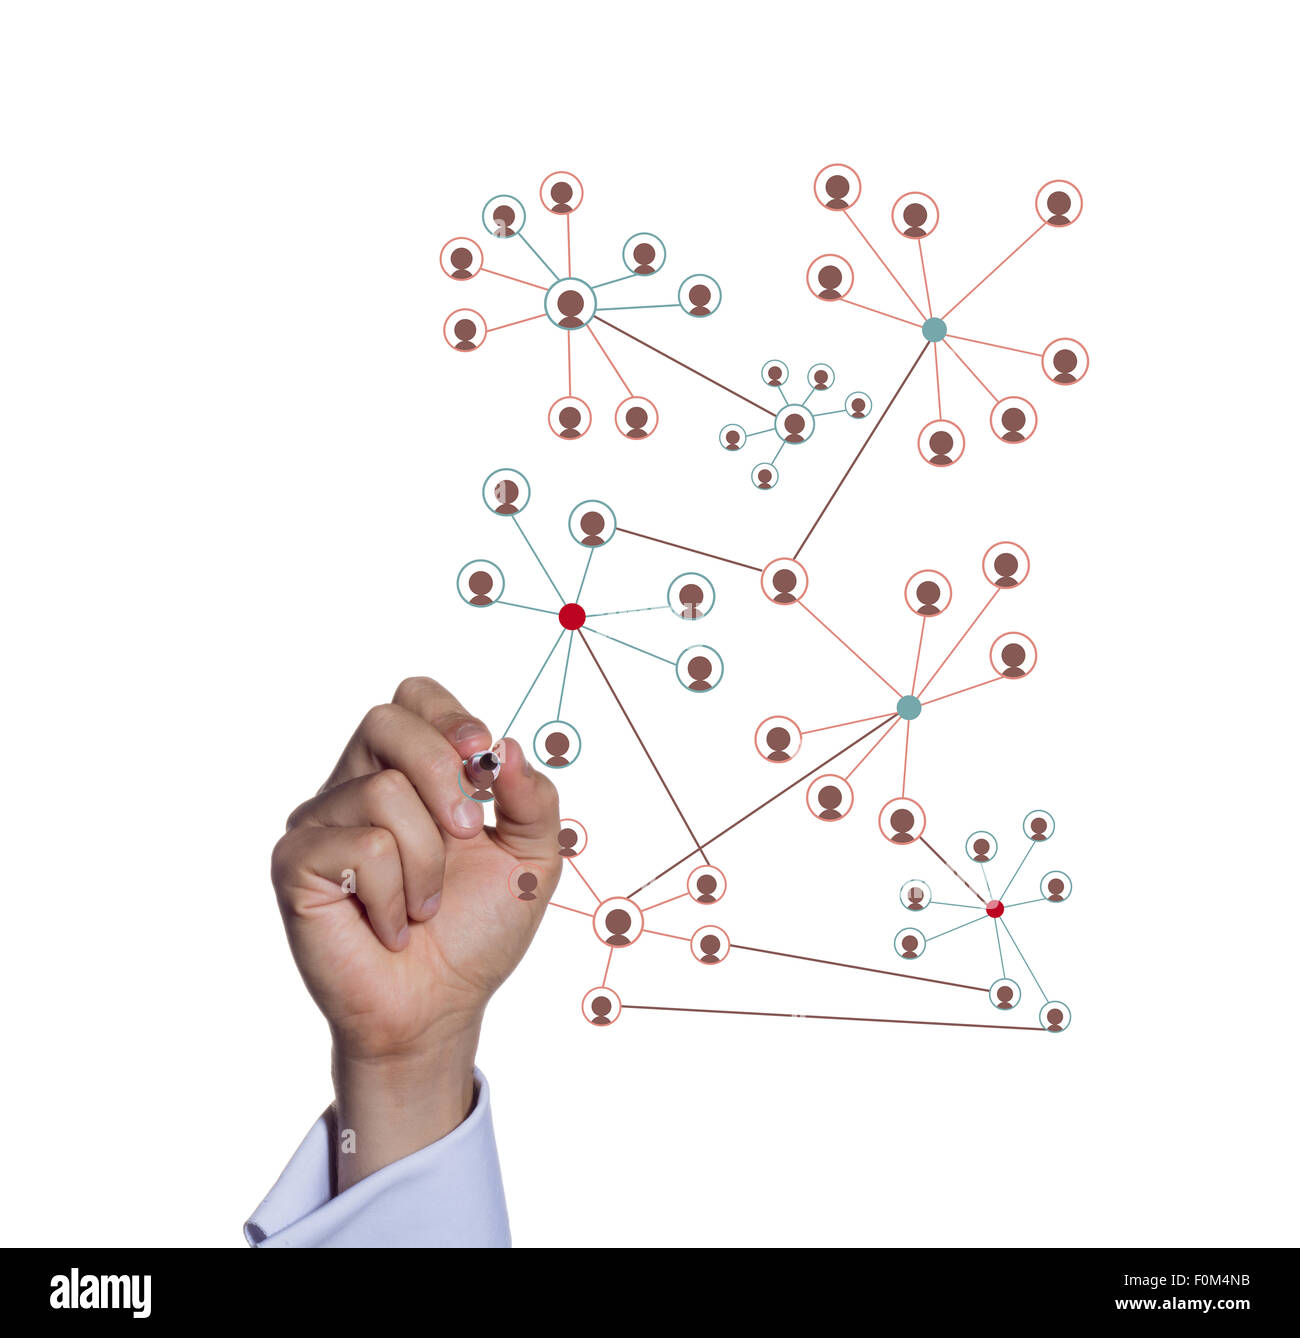 Business man drawing social network Stock Photo